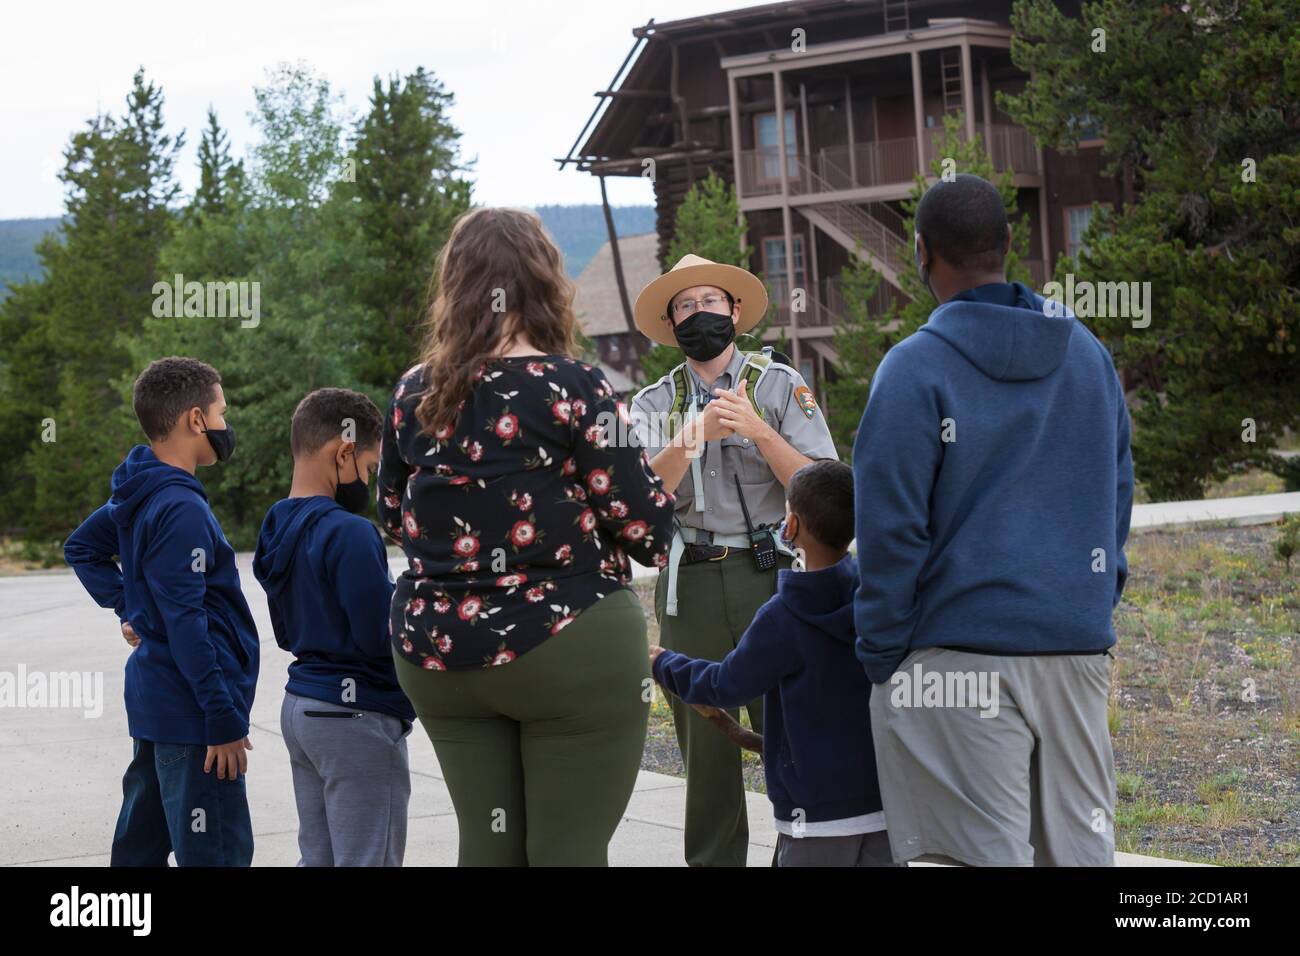 A National Park Ranger advises visitors outside the closed The Old Faithful Visitor Education Center in Yellowstone National Park, Wyoming on Monday, Stock Photo